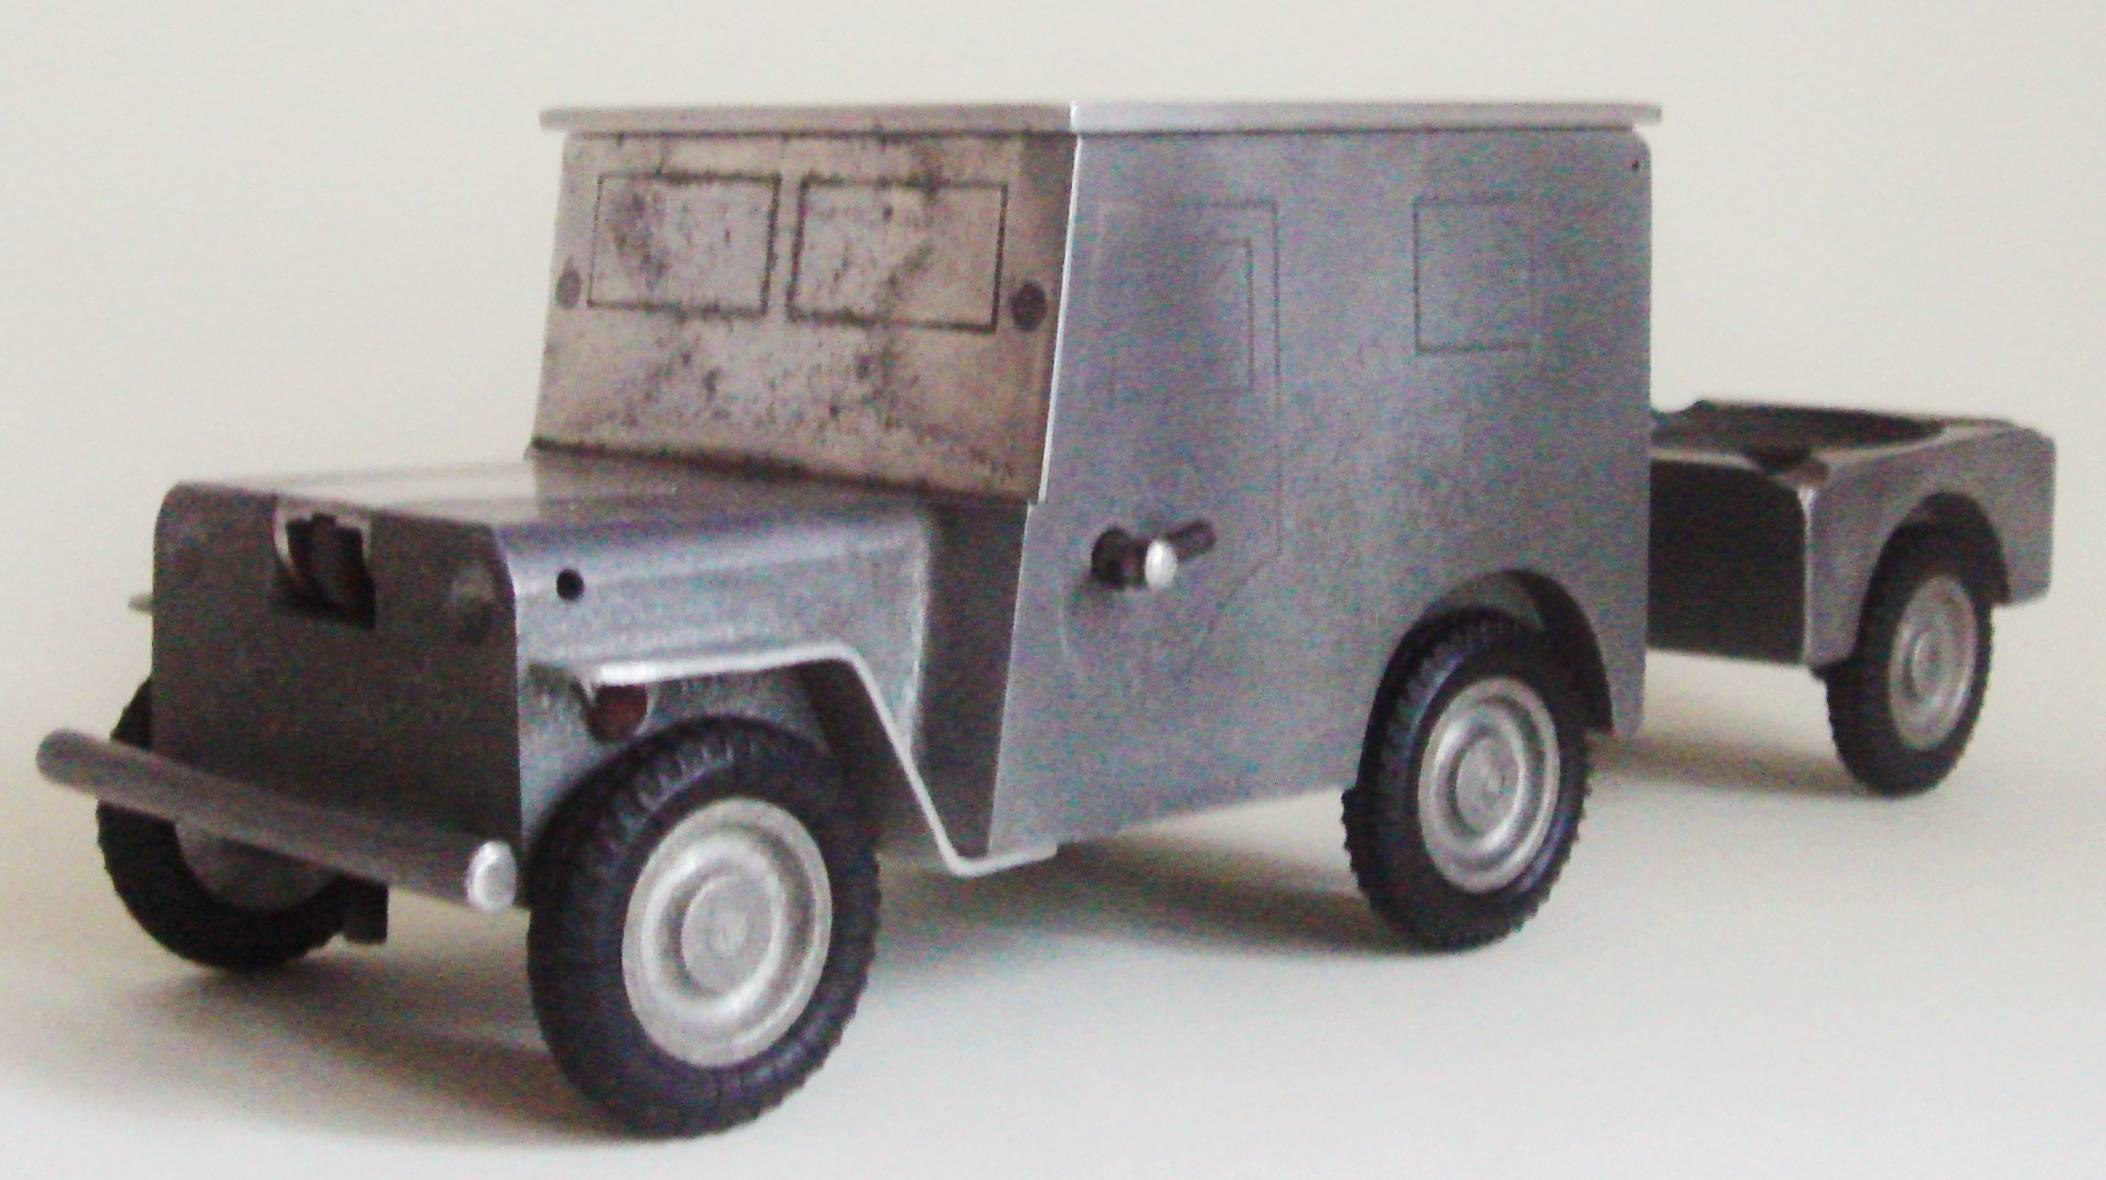 This German midcentury aluminum jeep table smoker's set features a stylized Willis Jeep in aluminum on four rubber wheels and is complete with a spare wheel mounted to the back. When the Jeep's roof is lifted it reveals a cigarette box and when its